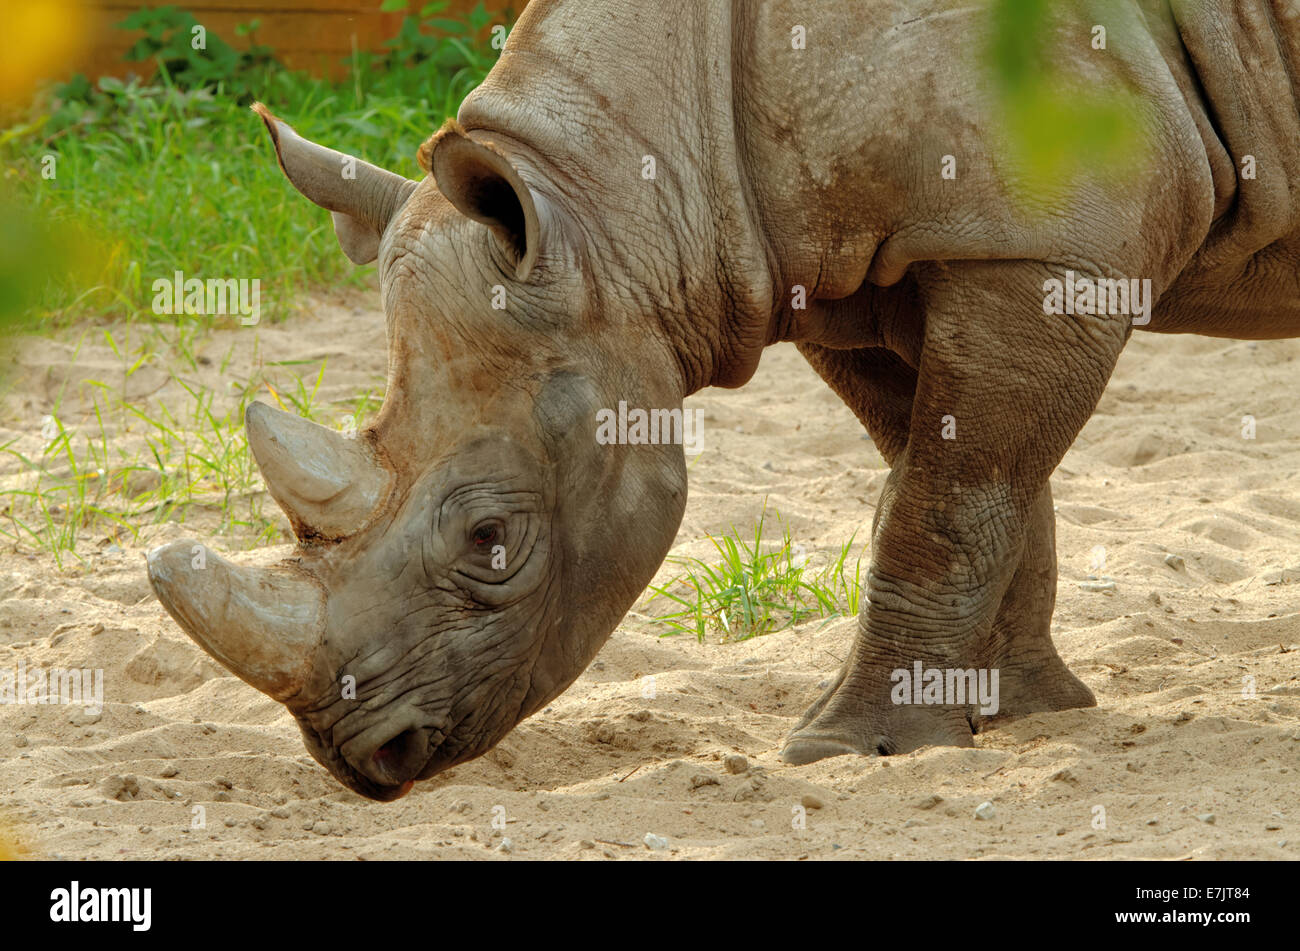 Black rhinoceros or hook-lipped rhinoceros (Diceros bicornis) is a species of rhinoceros, native to eastern and central Africa. Stock Photo